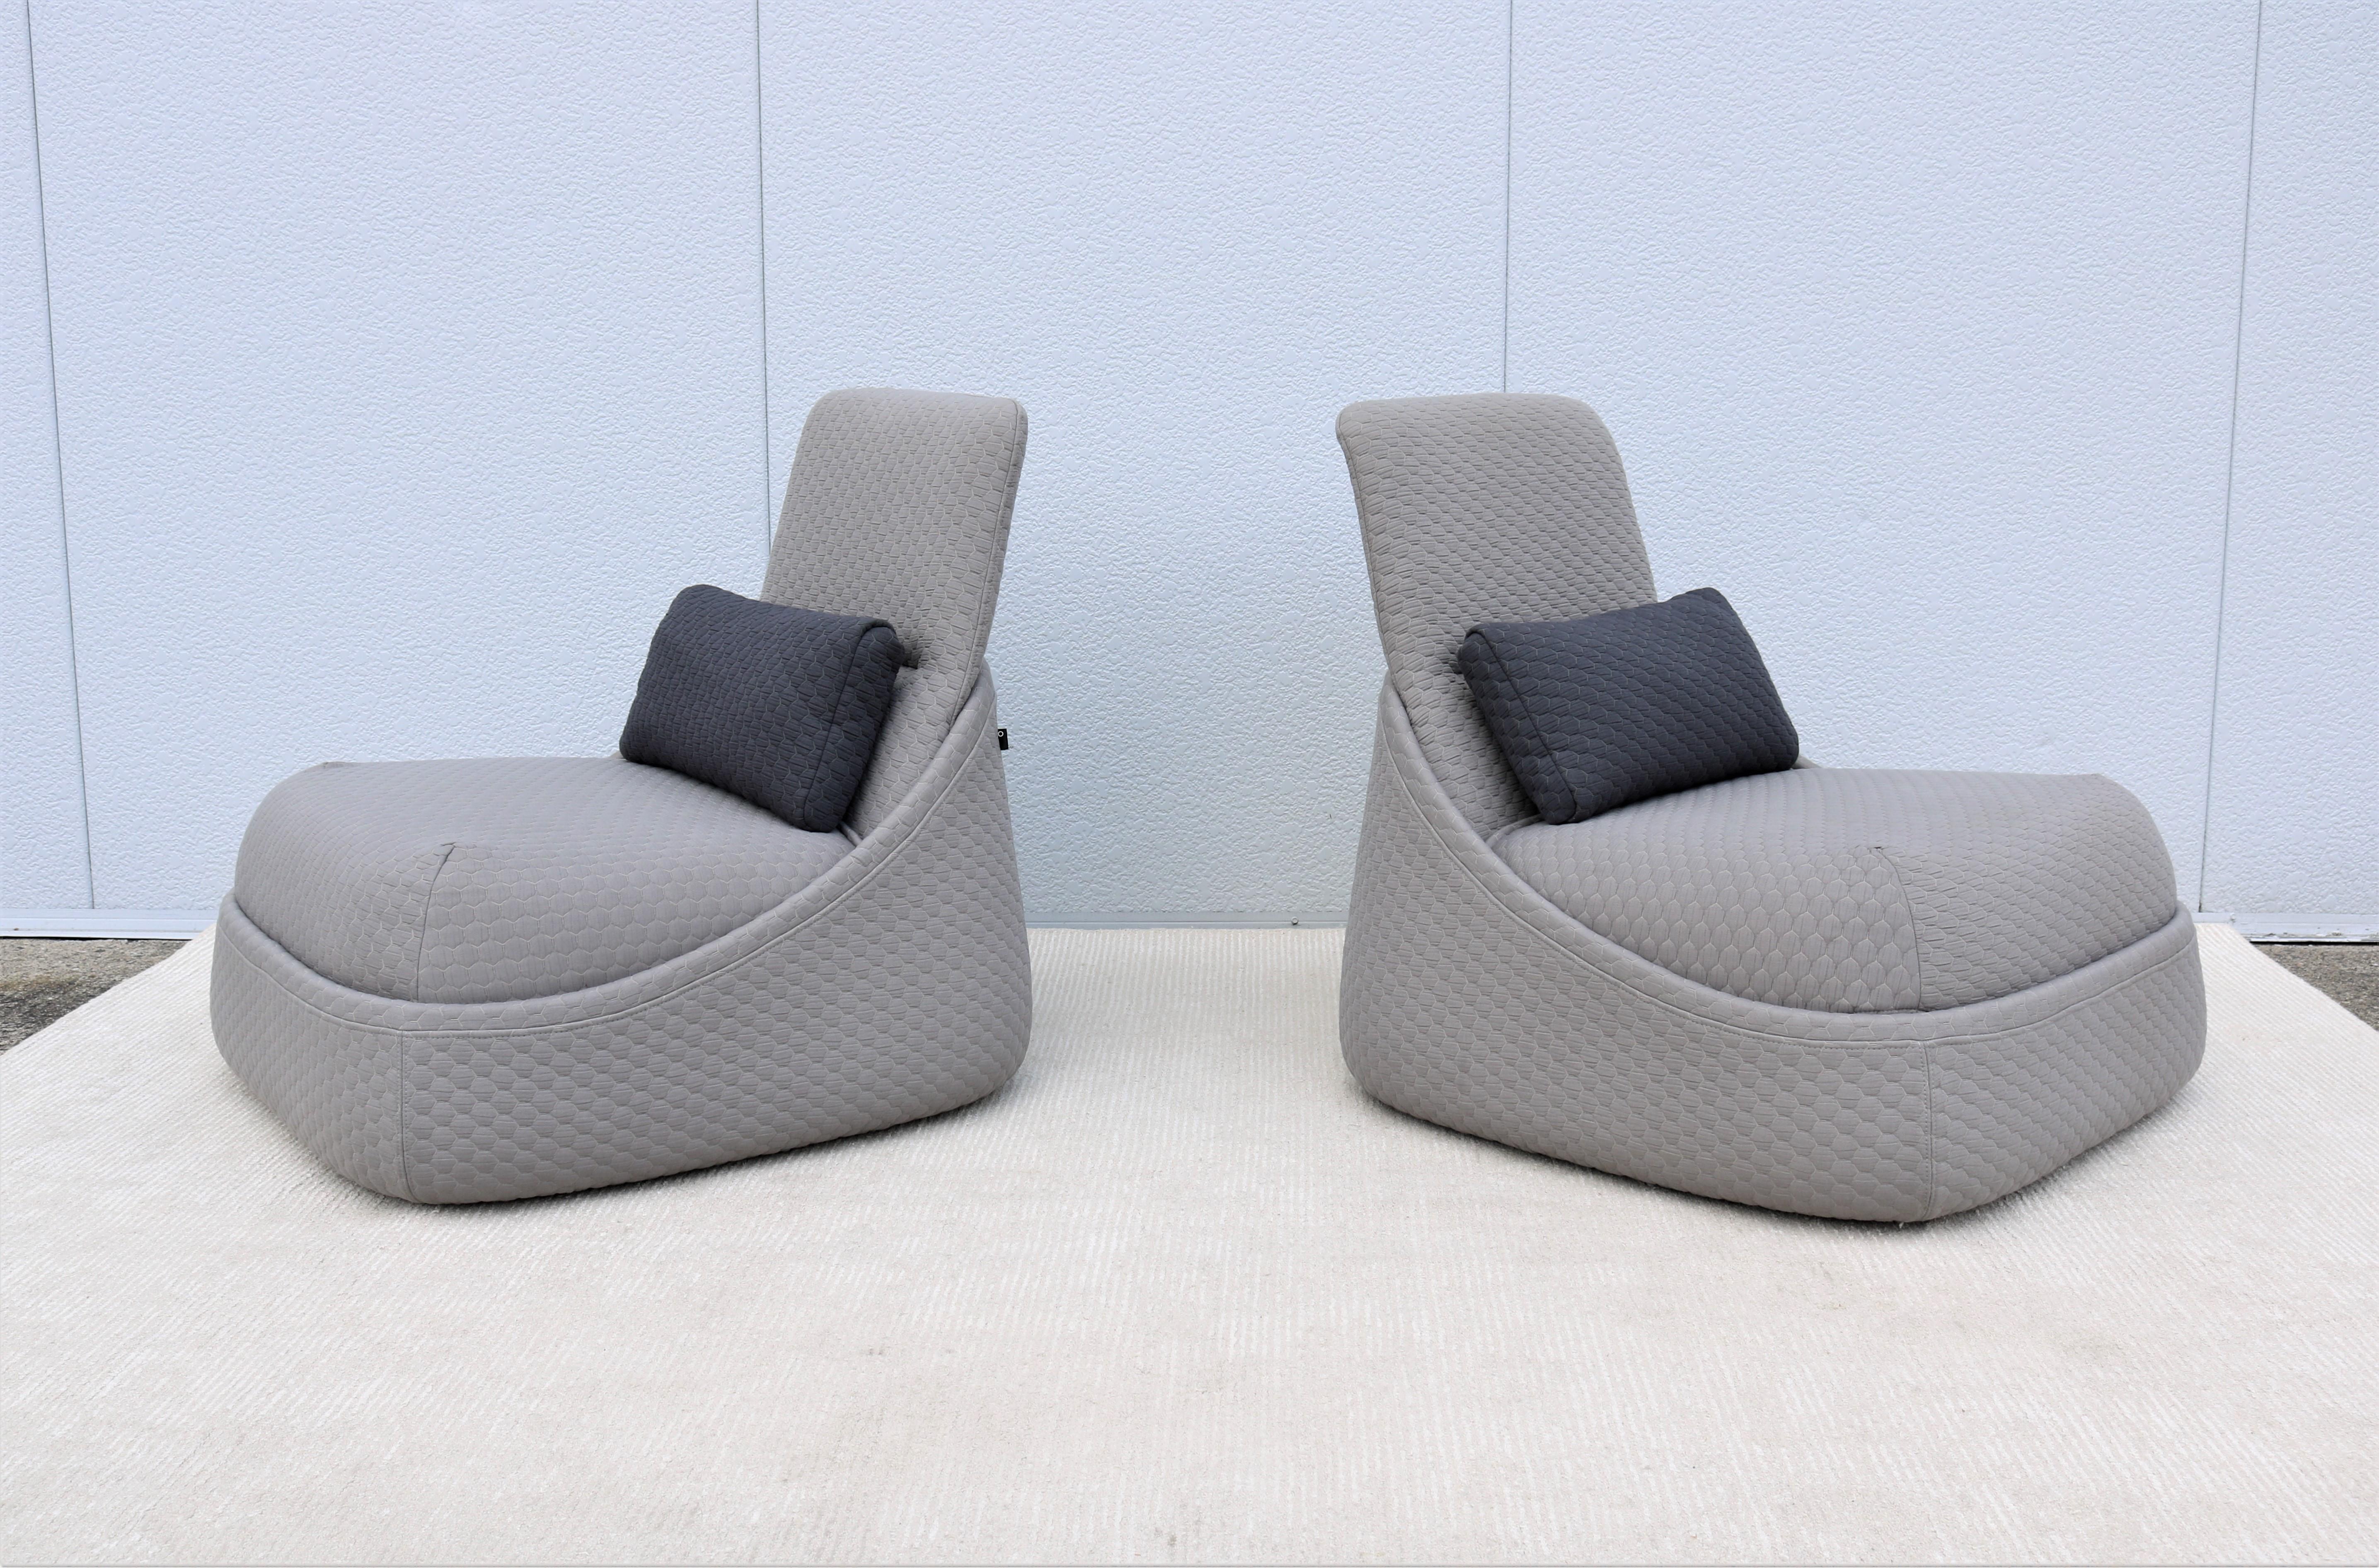 Fabric Modern Patricia Urquiola for Coalesse Hosu Lounge Chairs with Ottoman, a Pair For Sale